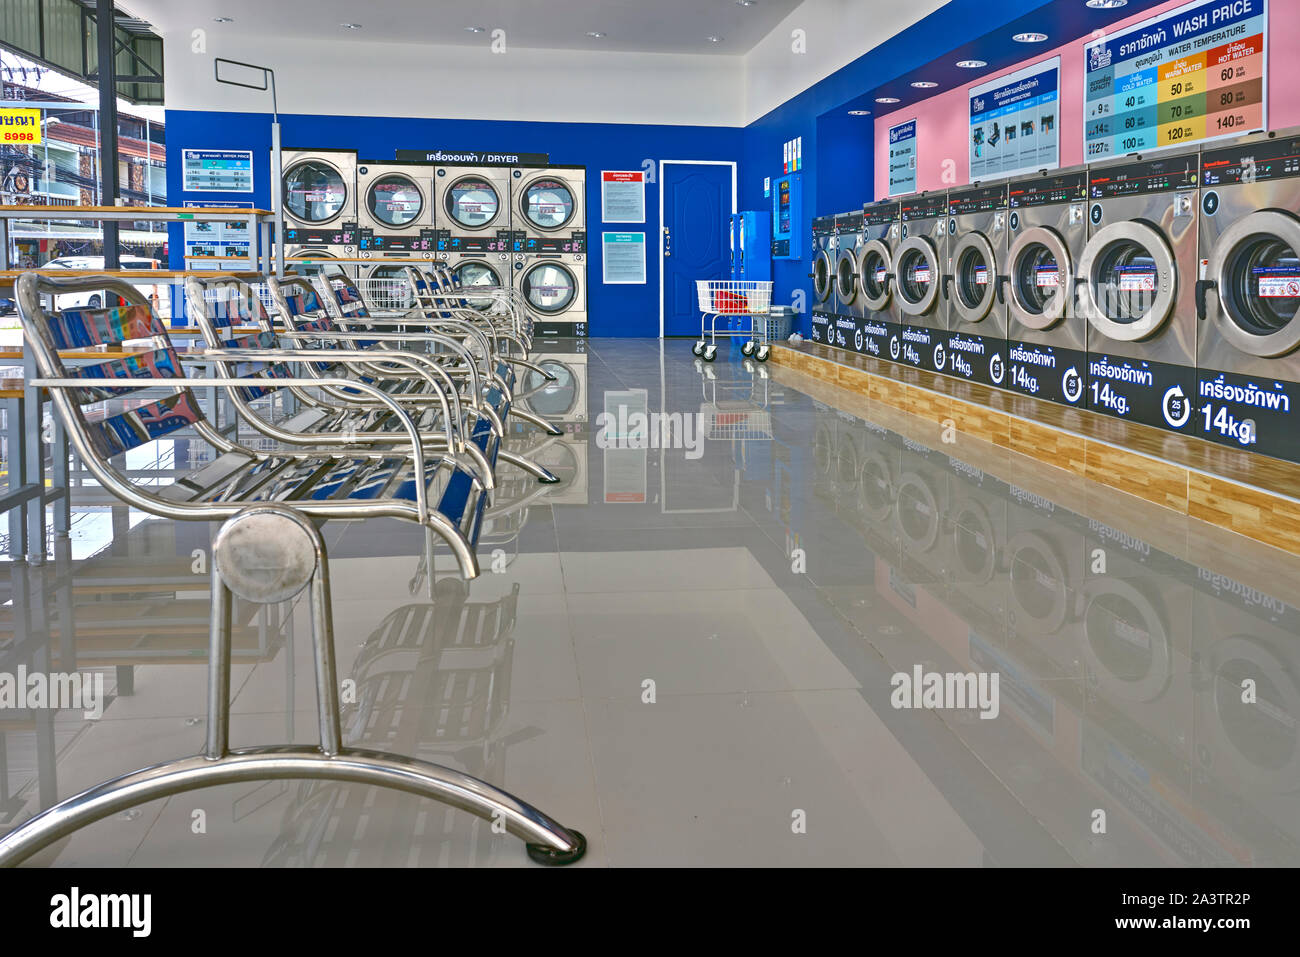 Laundromat interior with washing machines and seating for customers.Thailand Southeast Asia Stock Photo